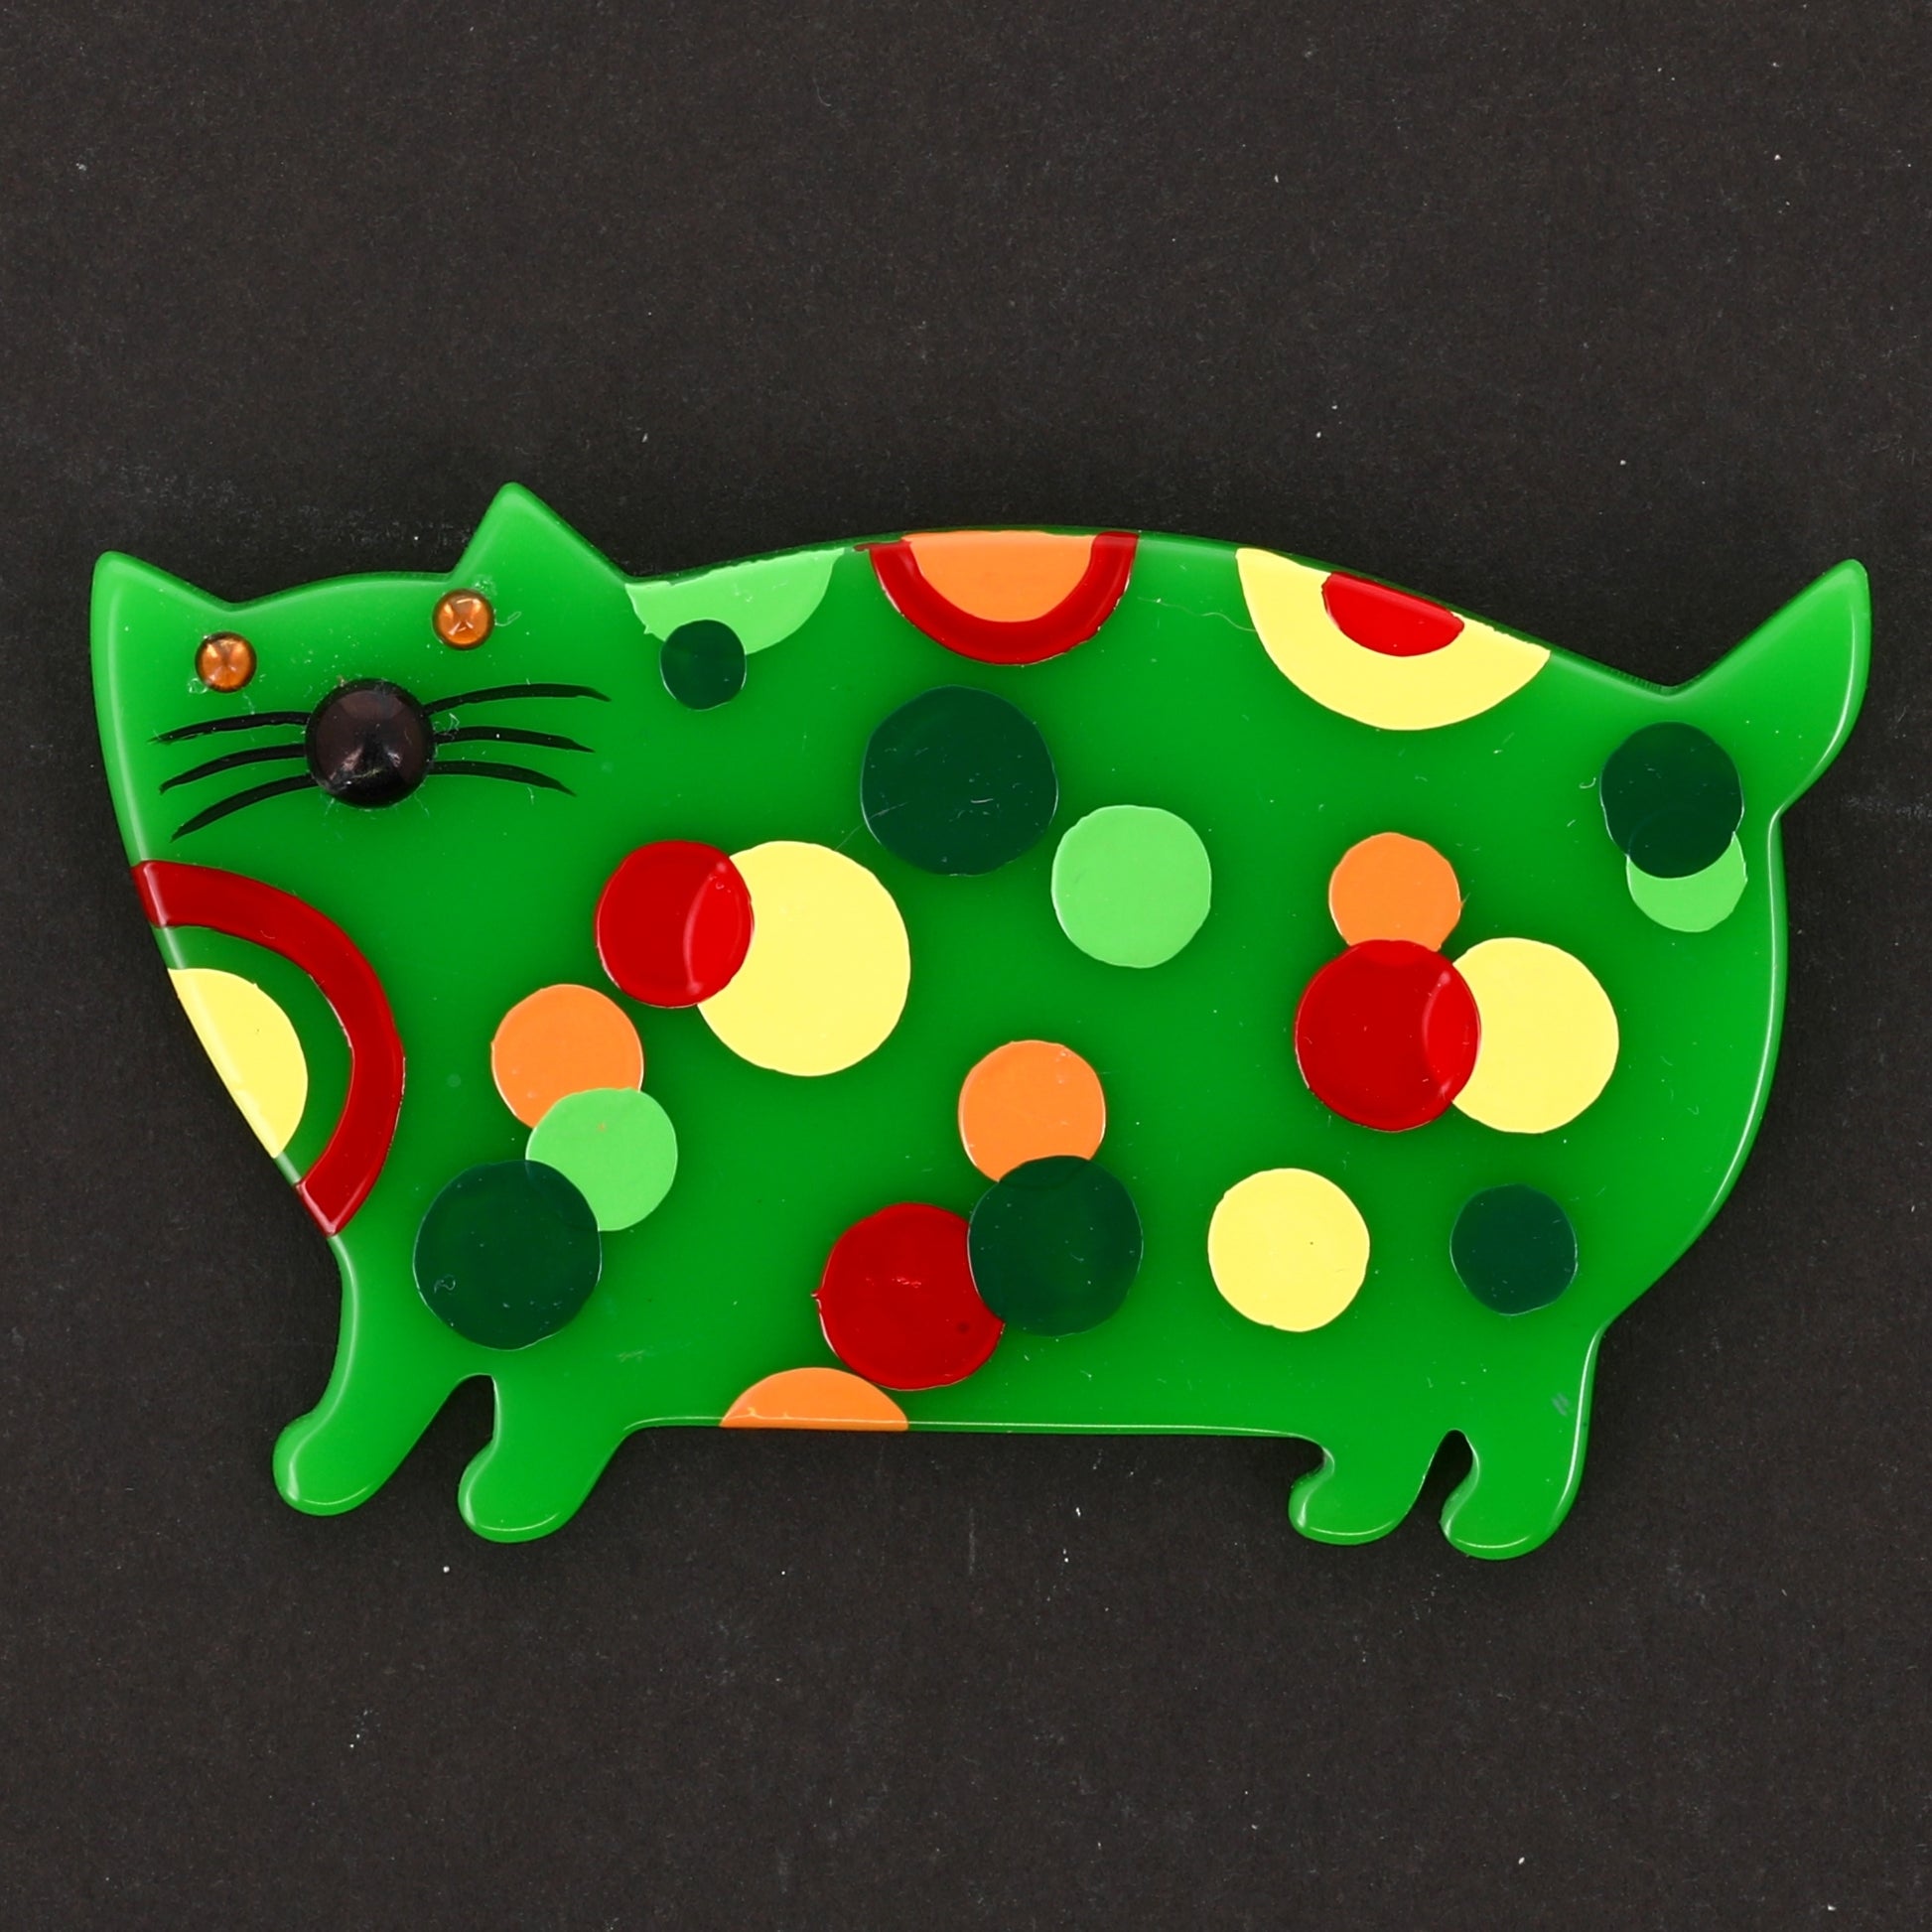 Miny Decor Cat Brooch with green, almond, orange, yellow and red polka dots in galalith